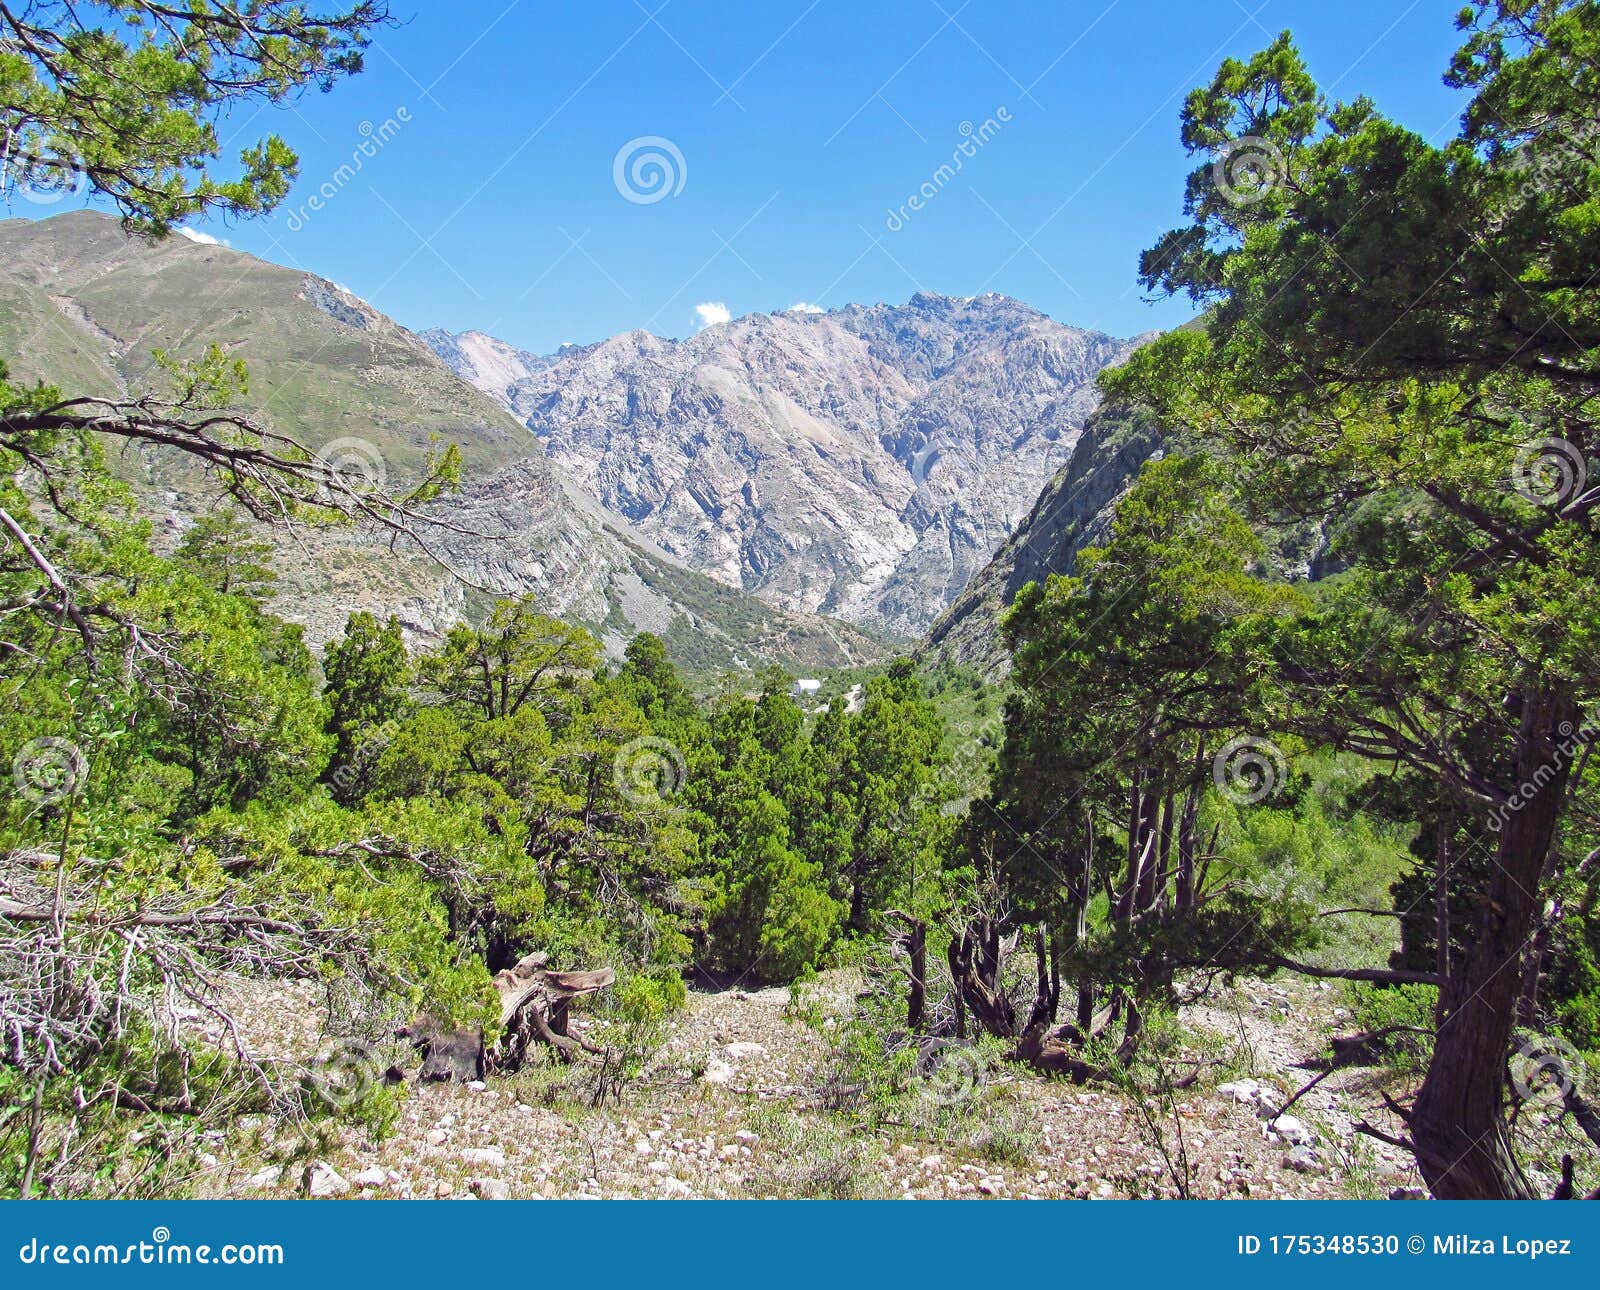 landscape of mountains and praire in los andes